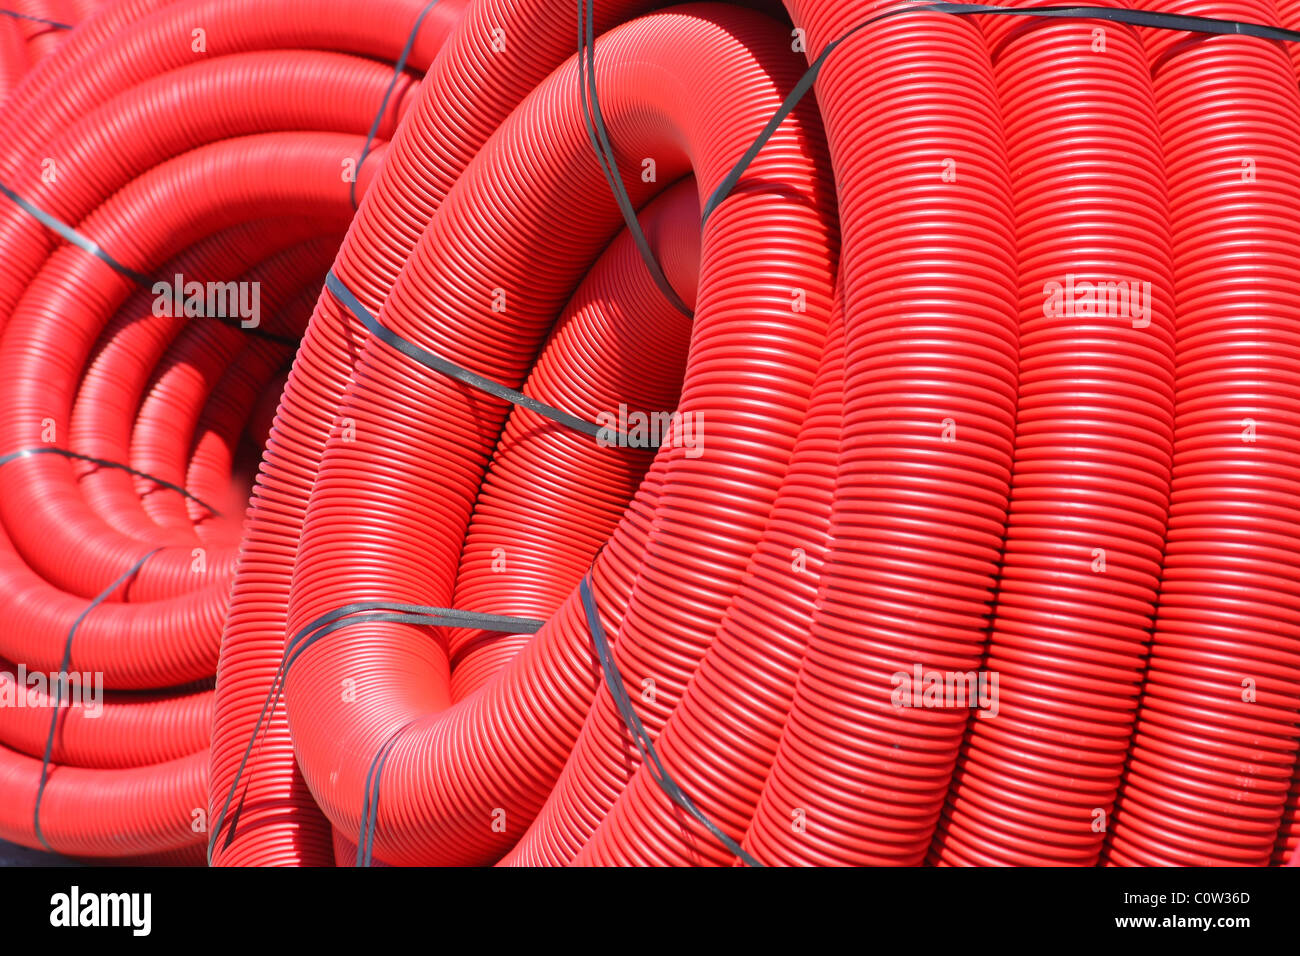 red tube coil Stock Photo